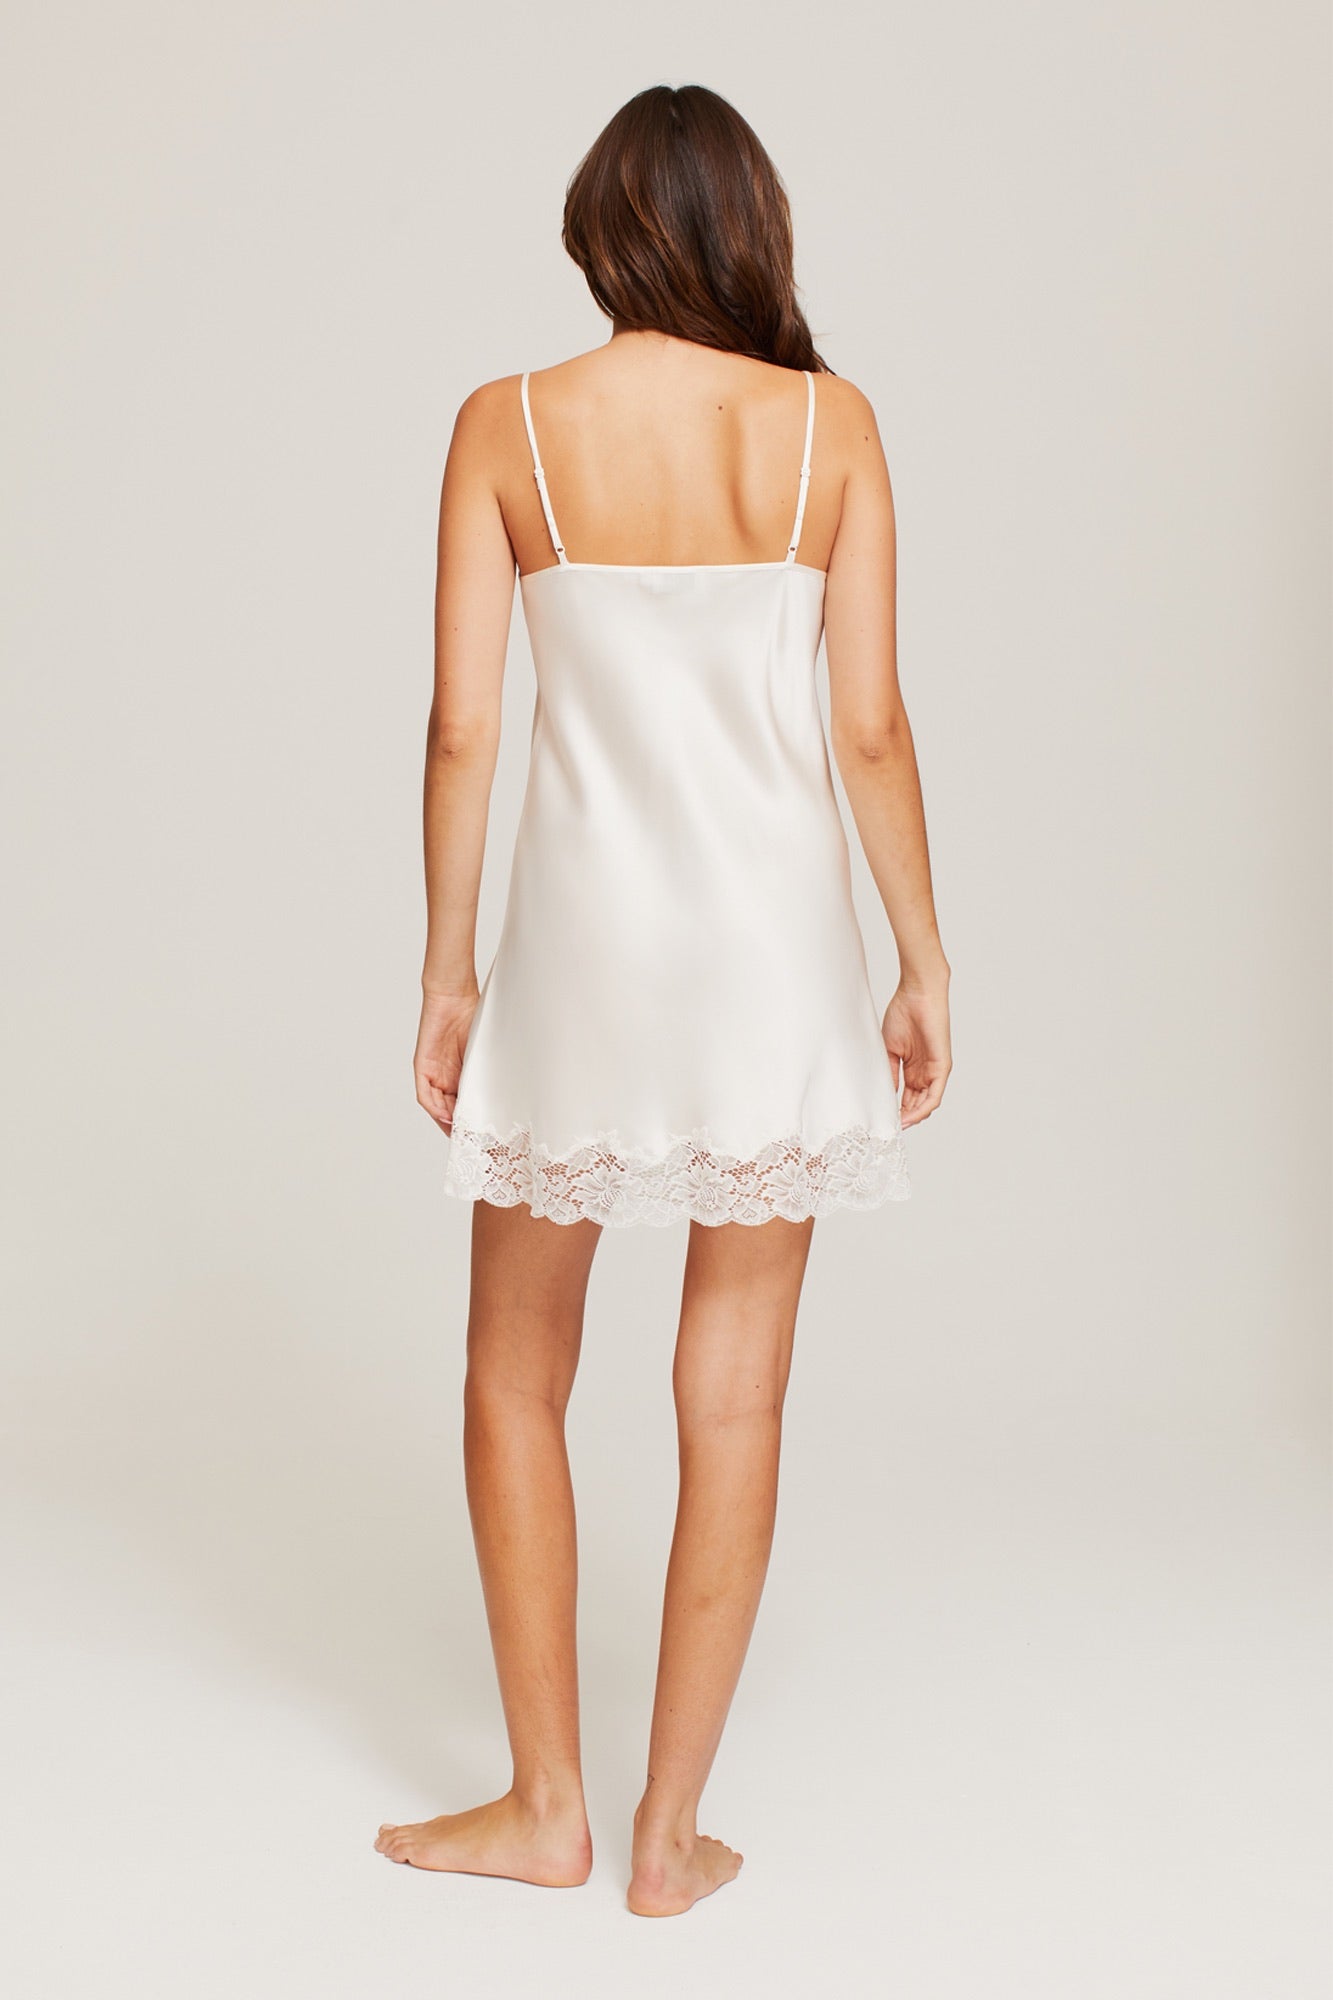 Silk chemise with lace trim